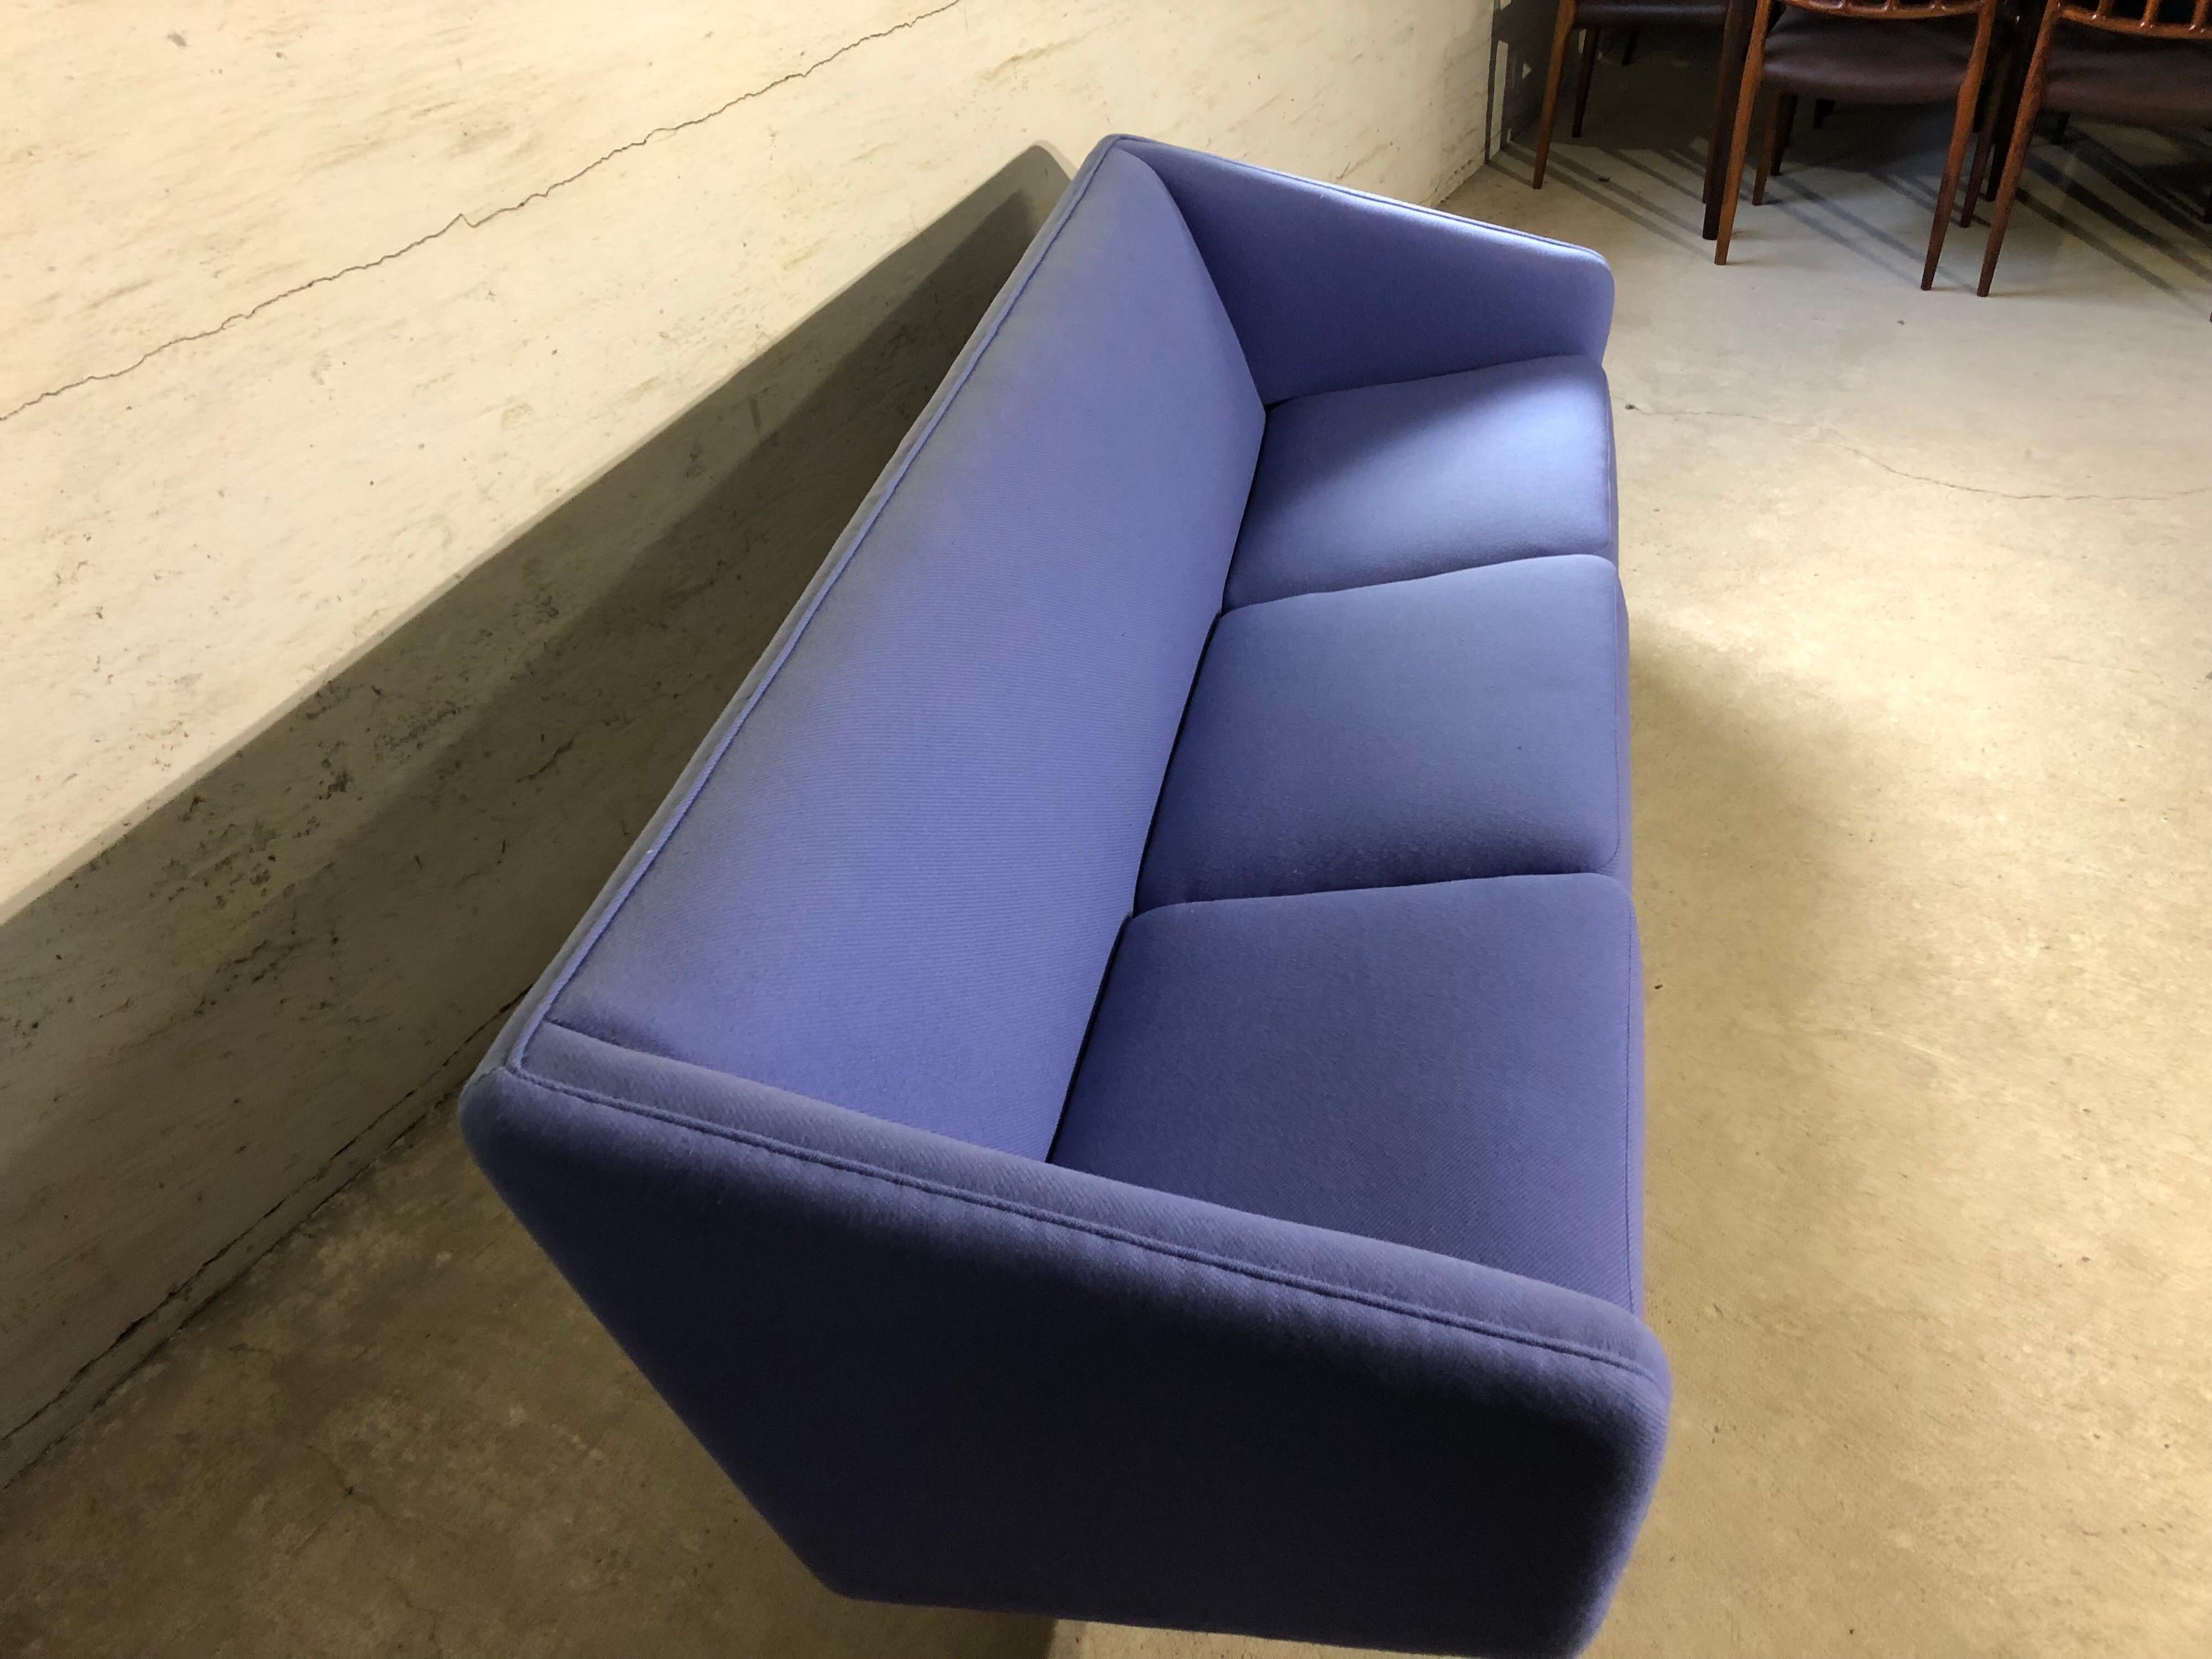 Illum Wikkelsø ML-90 Blue Sofa, by A. Mikael Laursen Danish Mid-Century Modern In Good Condition For Sale In Odense, DK